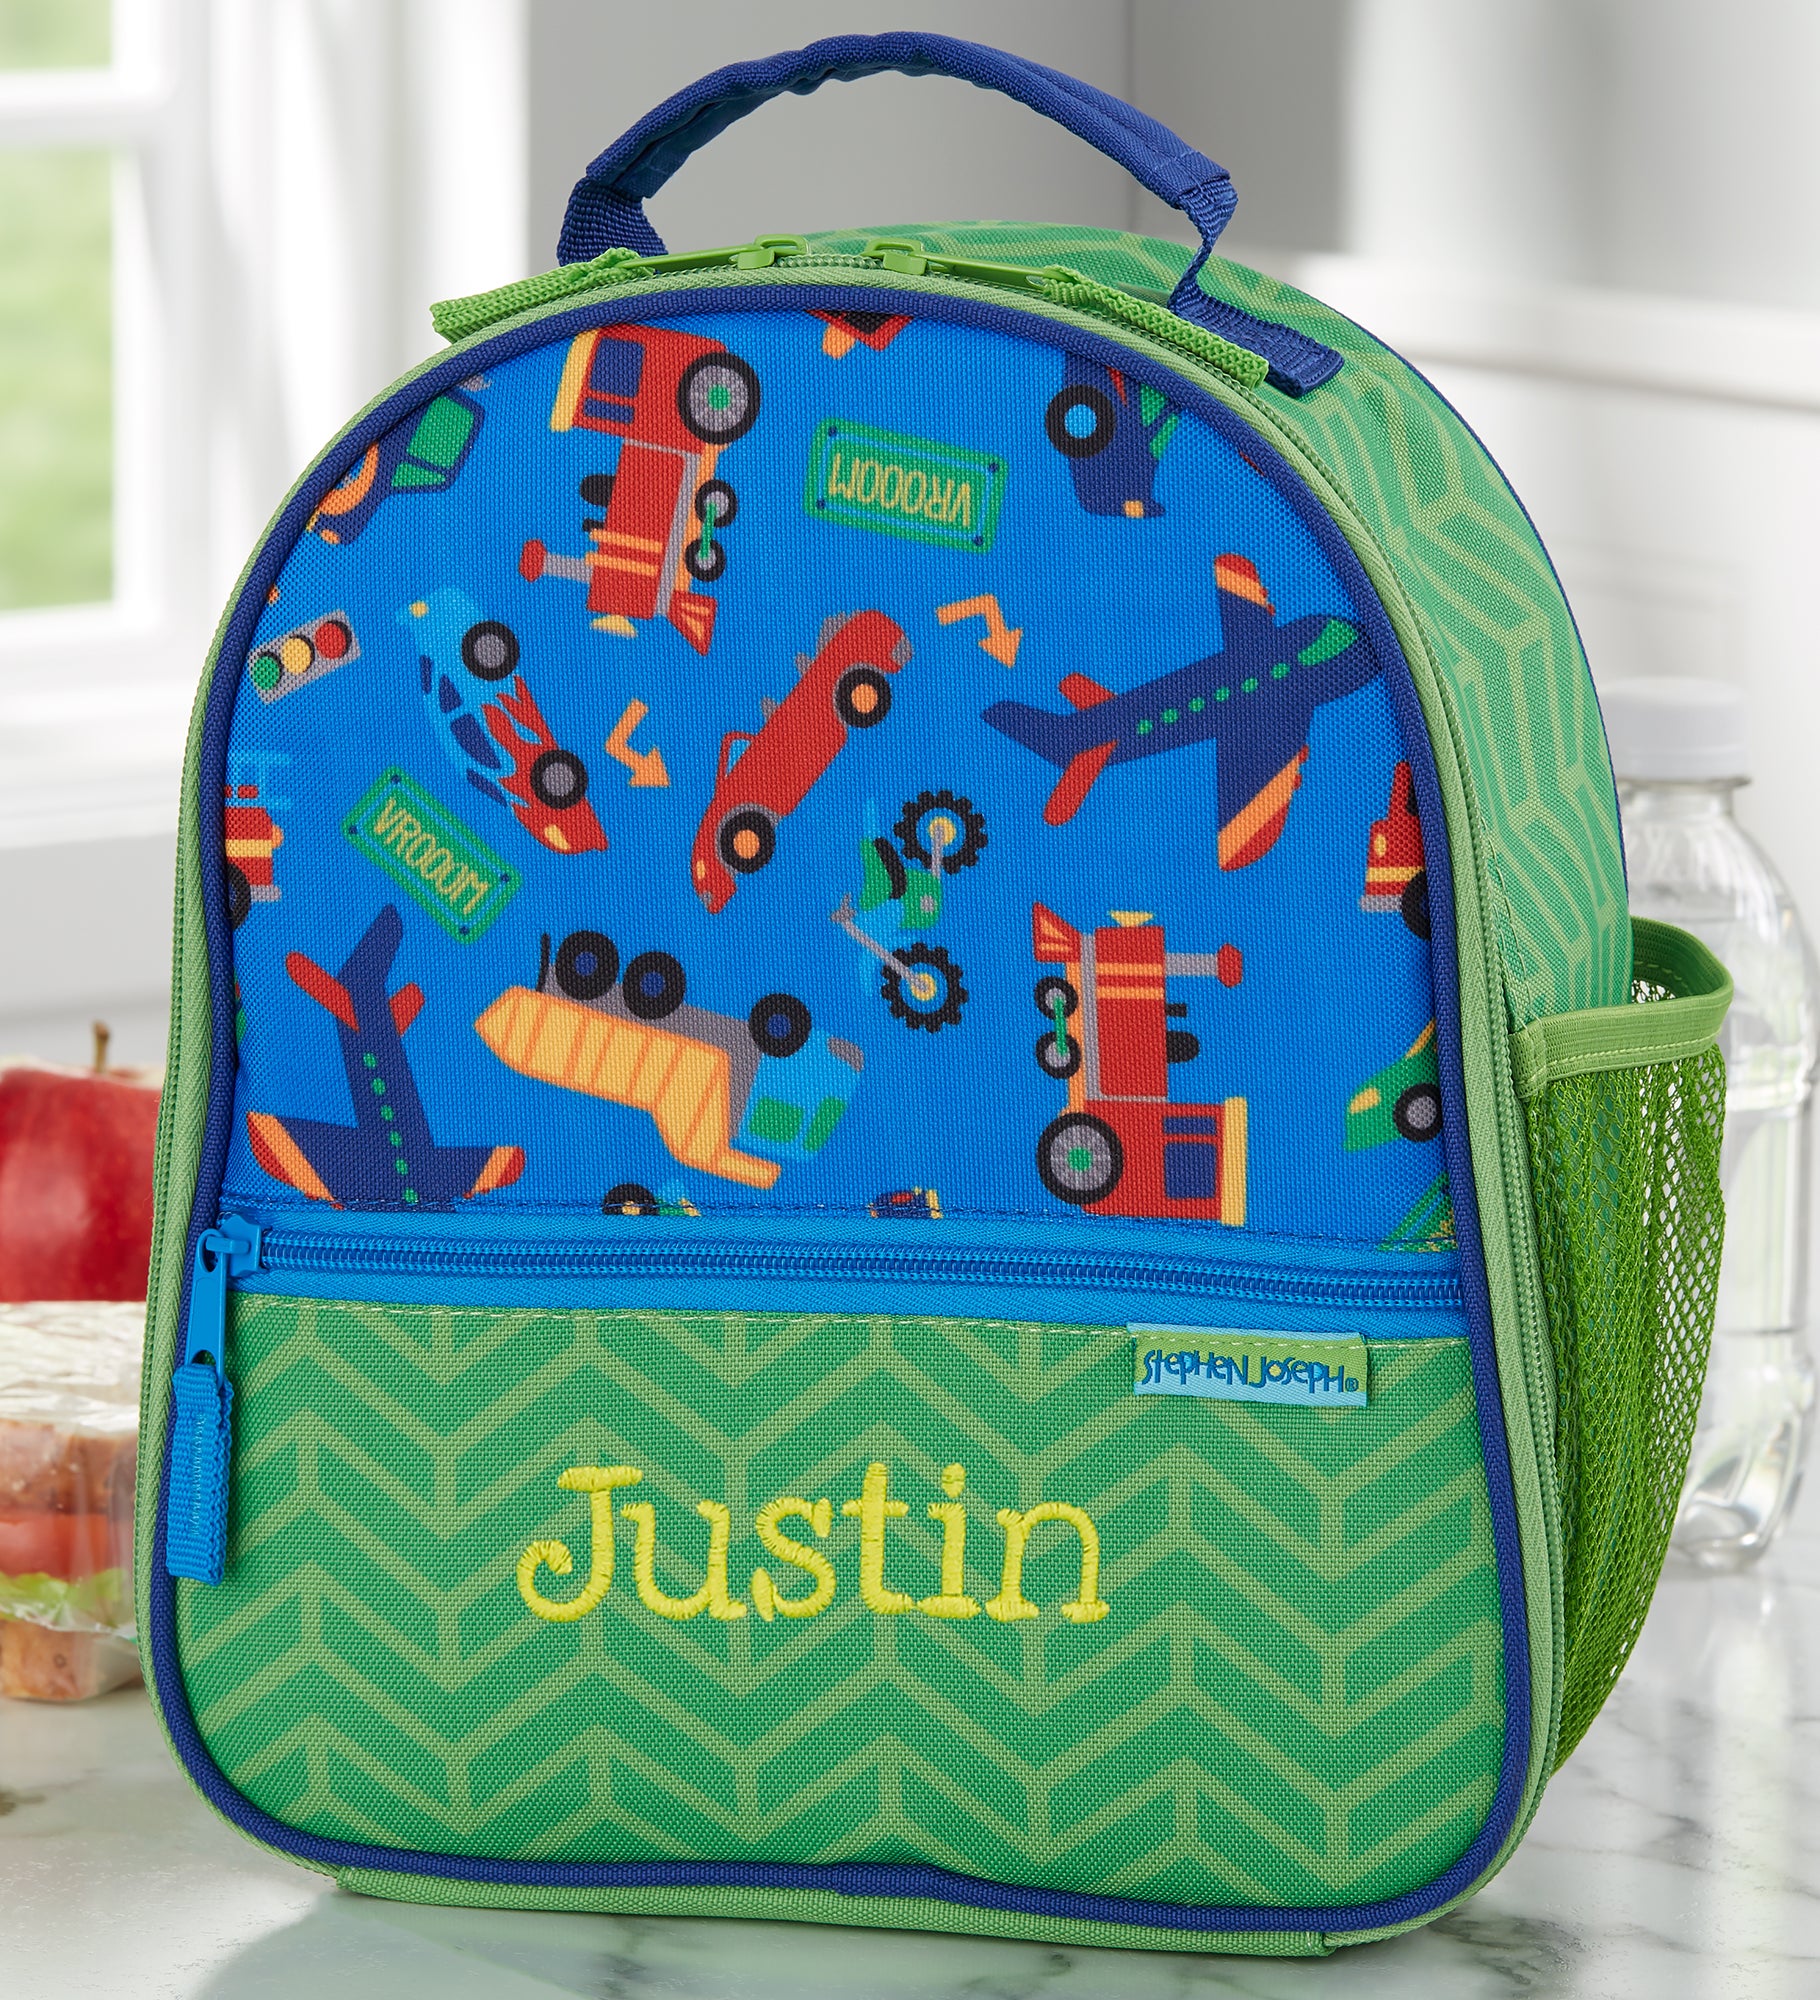 Transportation Print Personalized Lunch Bag by Stephen Joseph